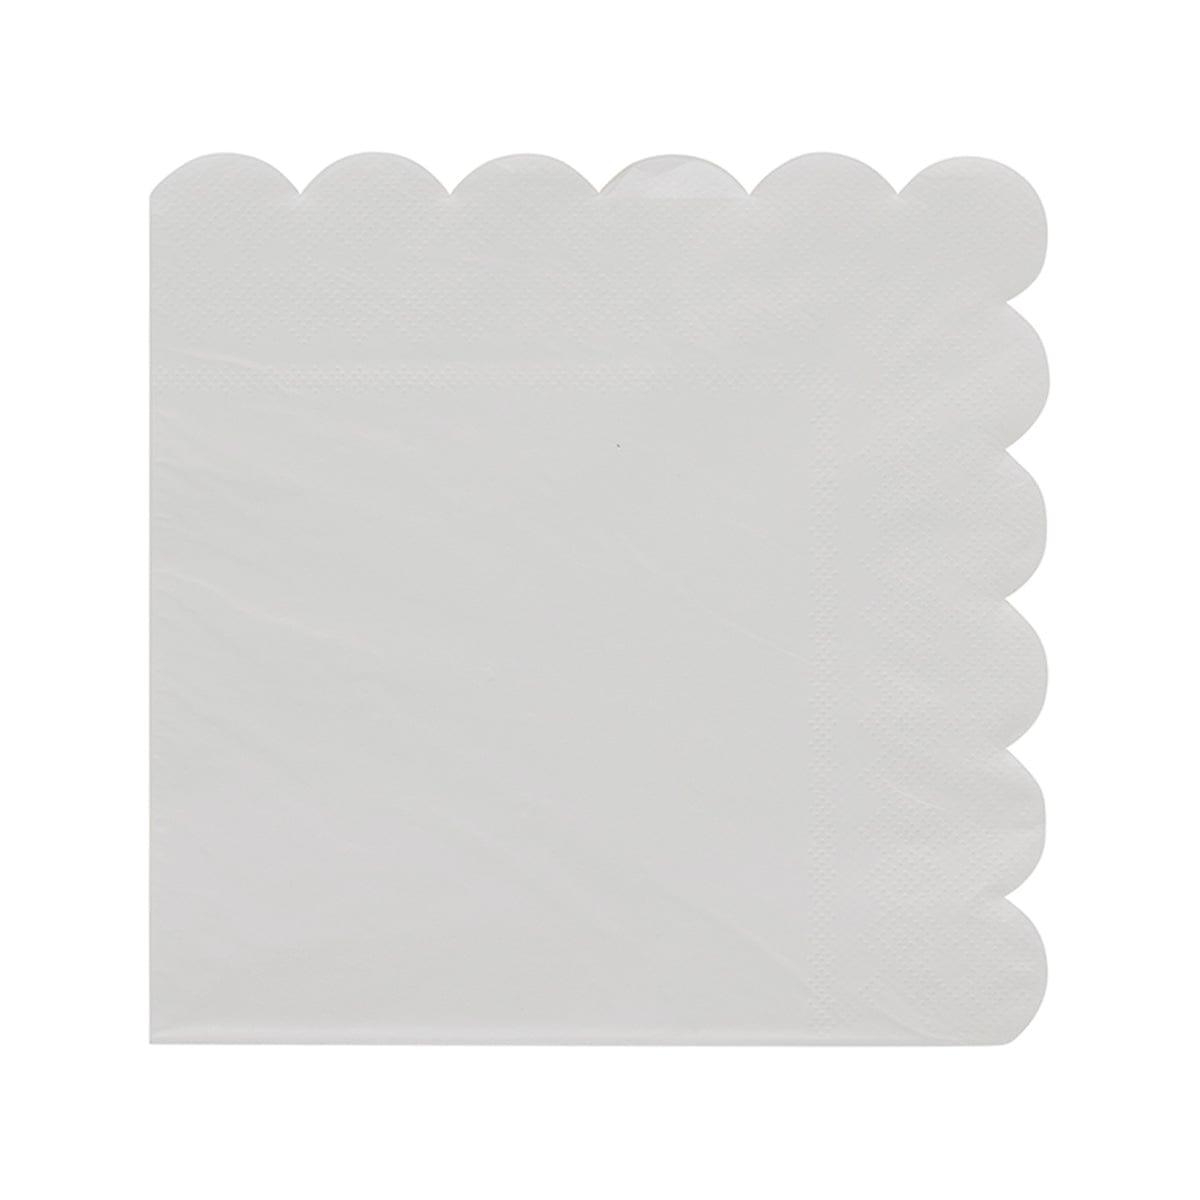 YIWU SANDY PAPER PRODUCTS CO., LTD Everyday Entertaining Flower Edge White Lunch Napkins, 16 Count